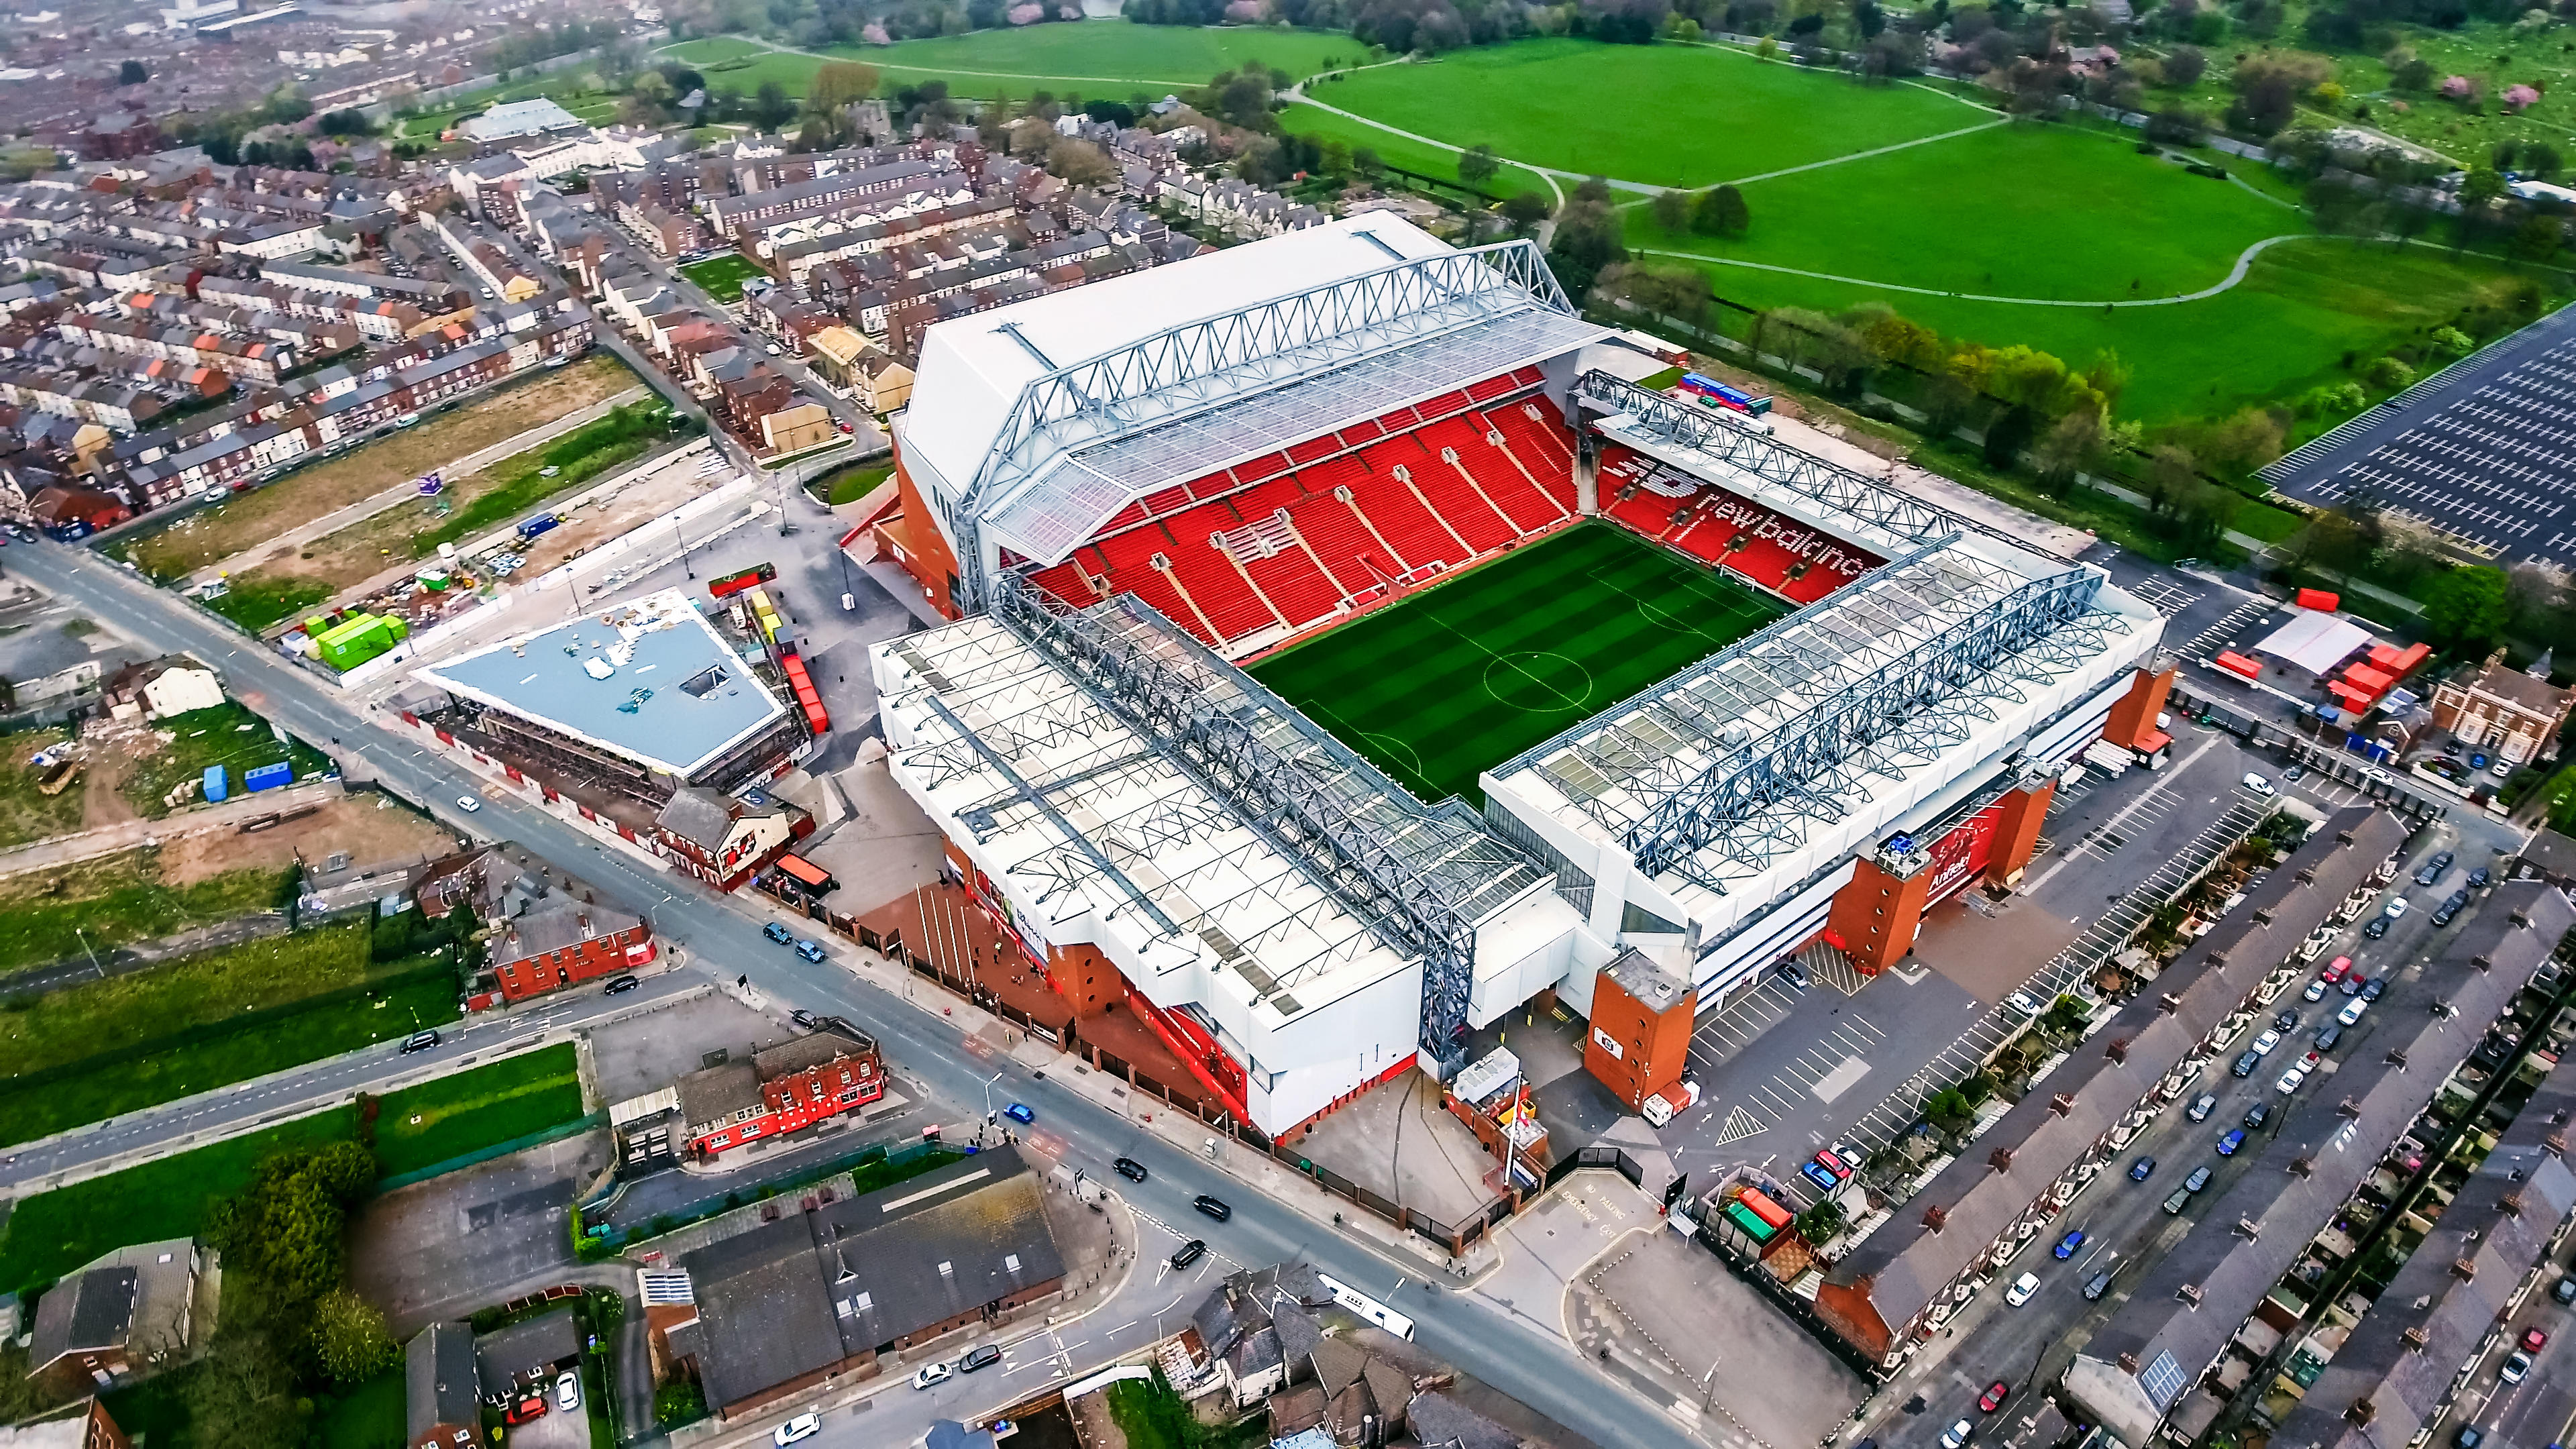 Liverpool's nostalgic stadium might get a more graceful but arguably less iconic look